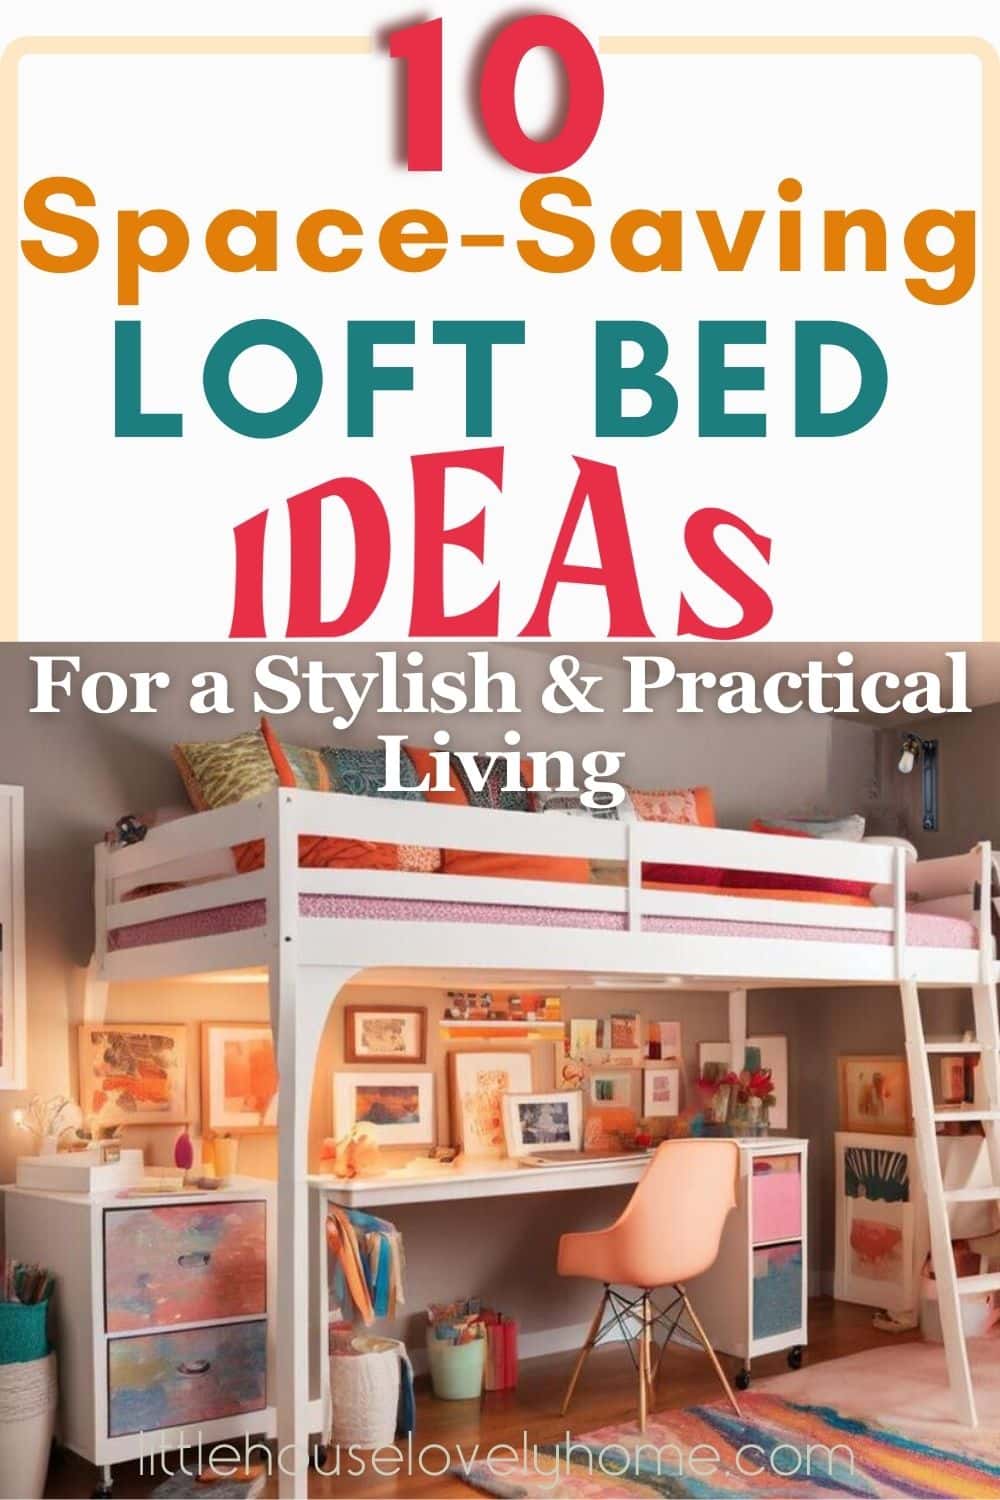 Loft Bed Ideas with Arts and Crafts area